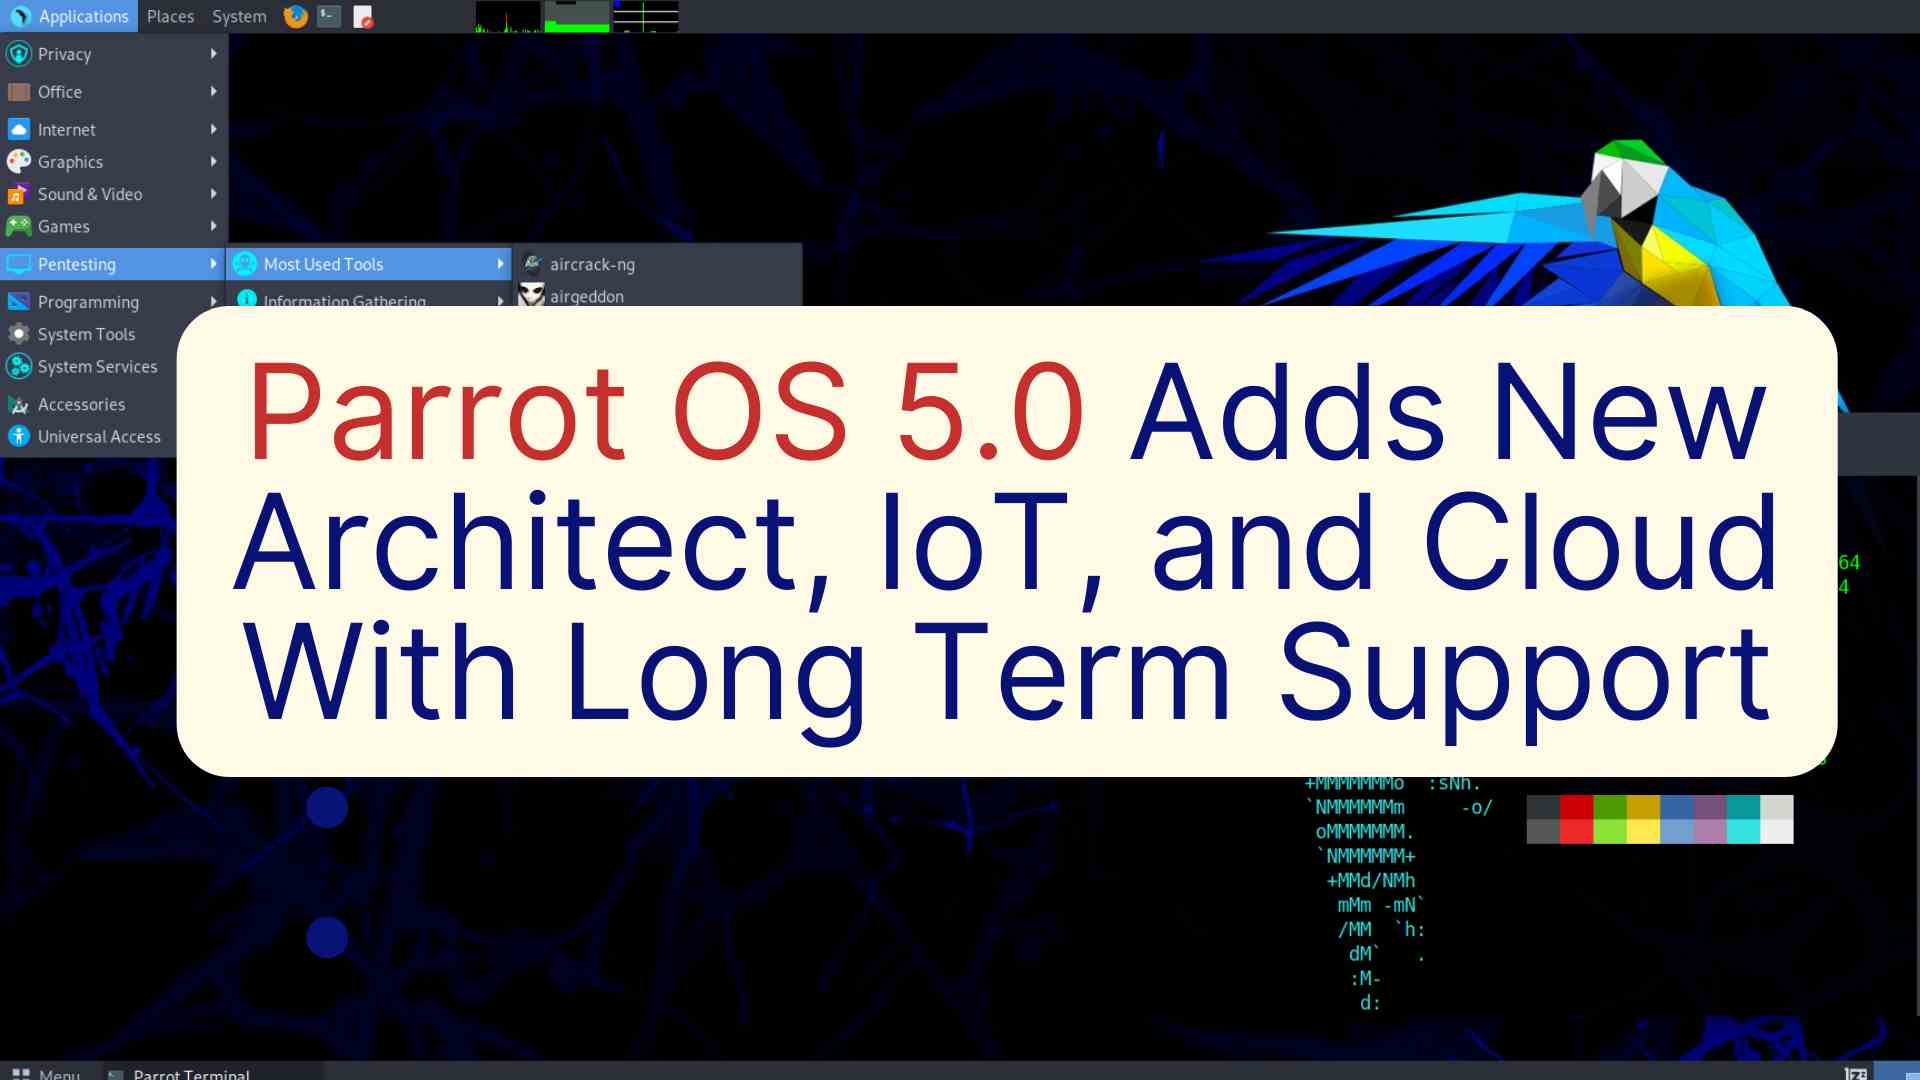 Parrot OS 5.0 released